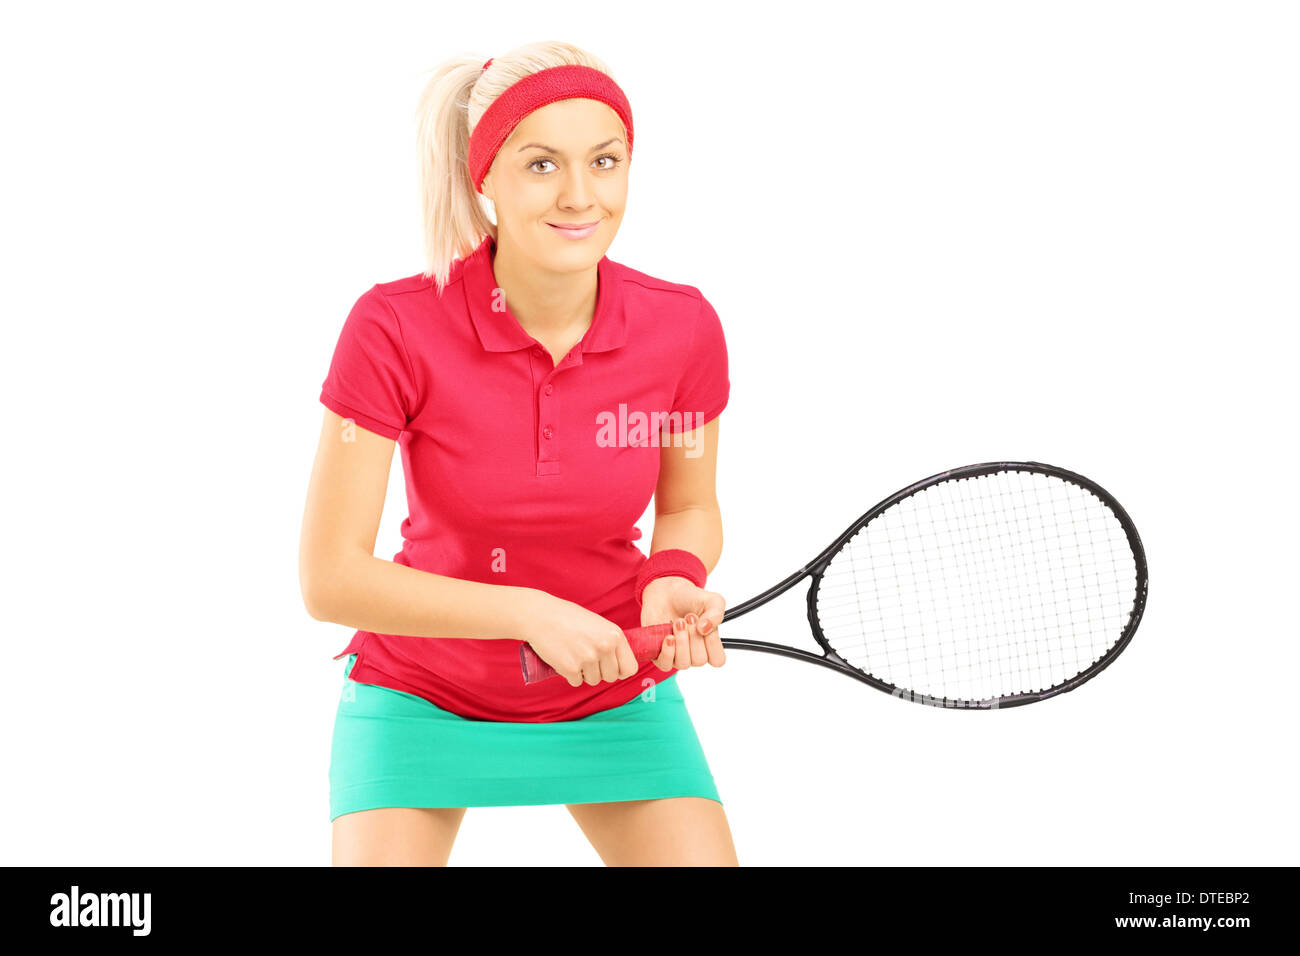 Young female tennis player holding a racket Stock Photo